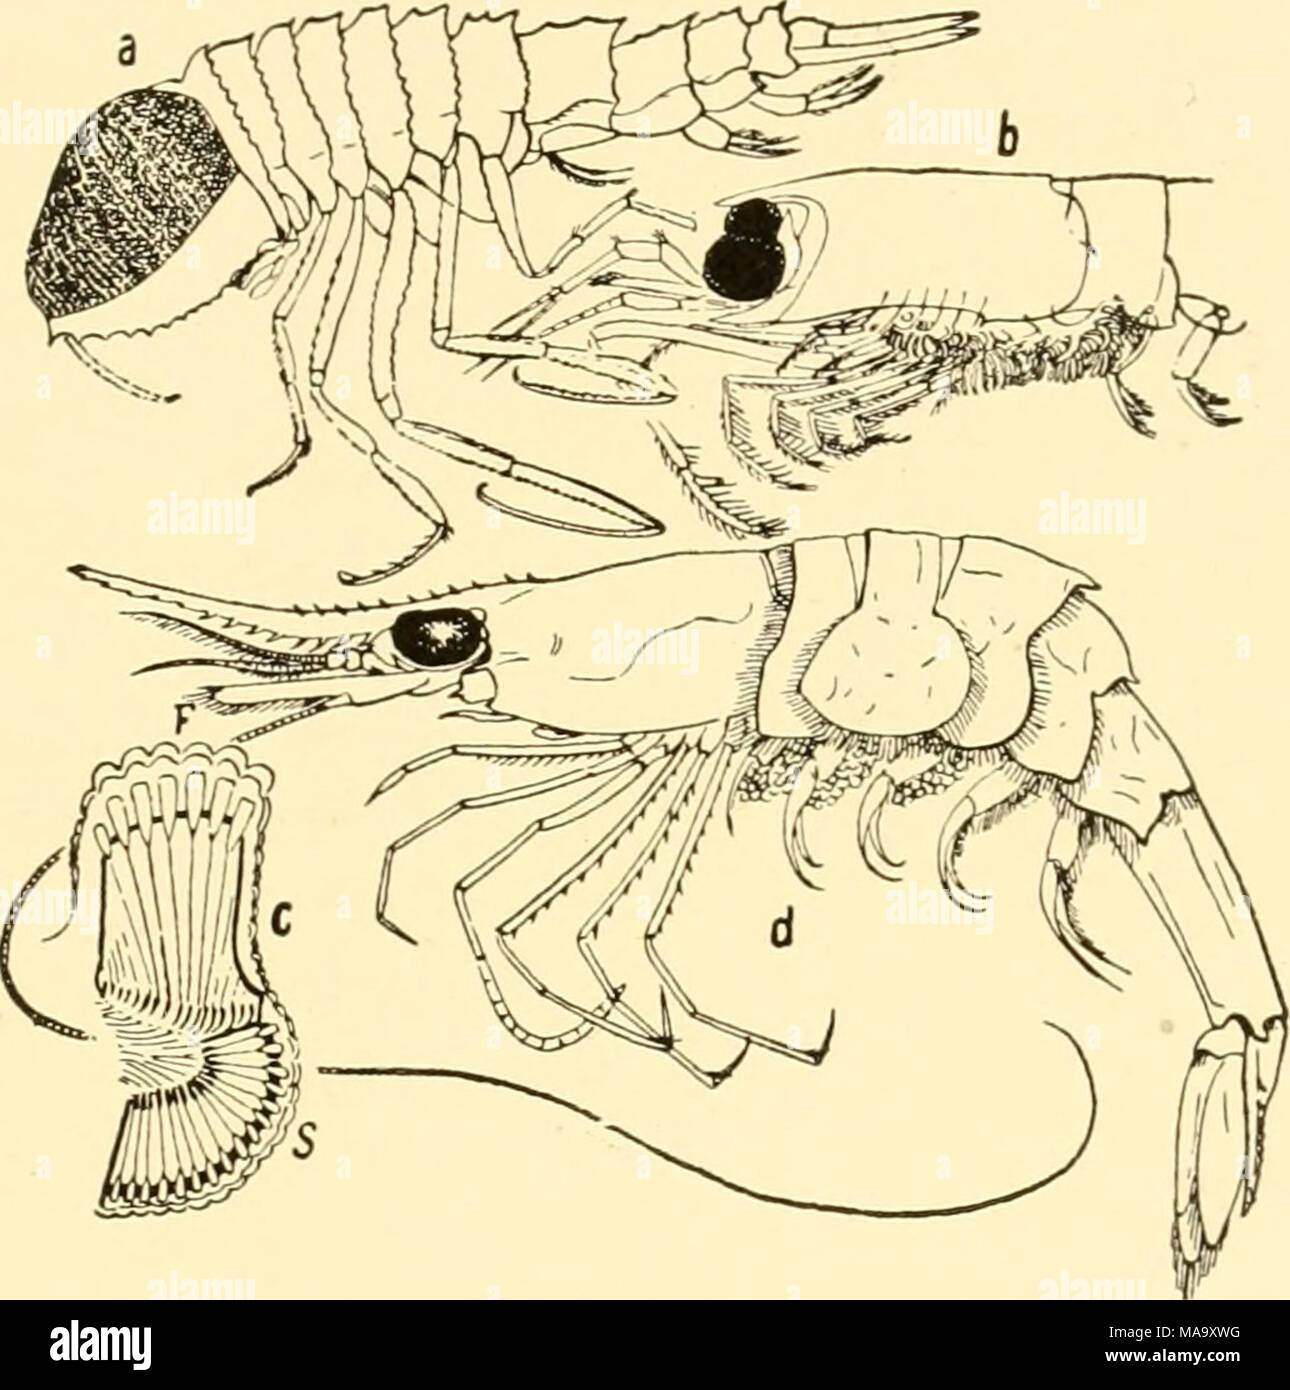 . Ecological animal geography; an authorized, rewritten edition based on Tiergeographie auf ockologischer grundlage . Fig. 69.—Deep-sea crustaceans with enlarged eyes, a, a hyperine, Cyrtisoma spinosum; b, an euphausid, Thysanoessa gregaria; c, eye of an euphausid, Stylocheiron mastigophorum in vertical section, in which F is the anterior and S the lateral eye; d, a caridid, Pandalus magnoculus. a, b, and d from the Chal- lenger report; c after Chun. benthal (Fig. 69d) .19 In the pelagial many amphipods (Fig. 69a), schizopods (Fig. 696), and sergestids agree in the possession of en- larged eye Stock Photo